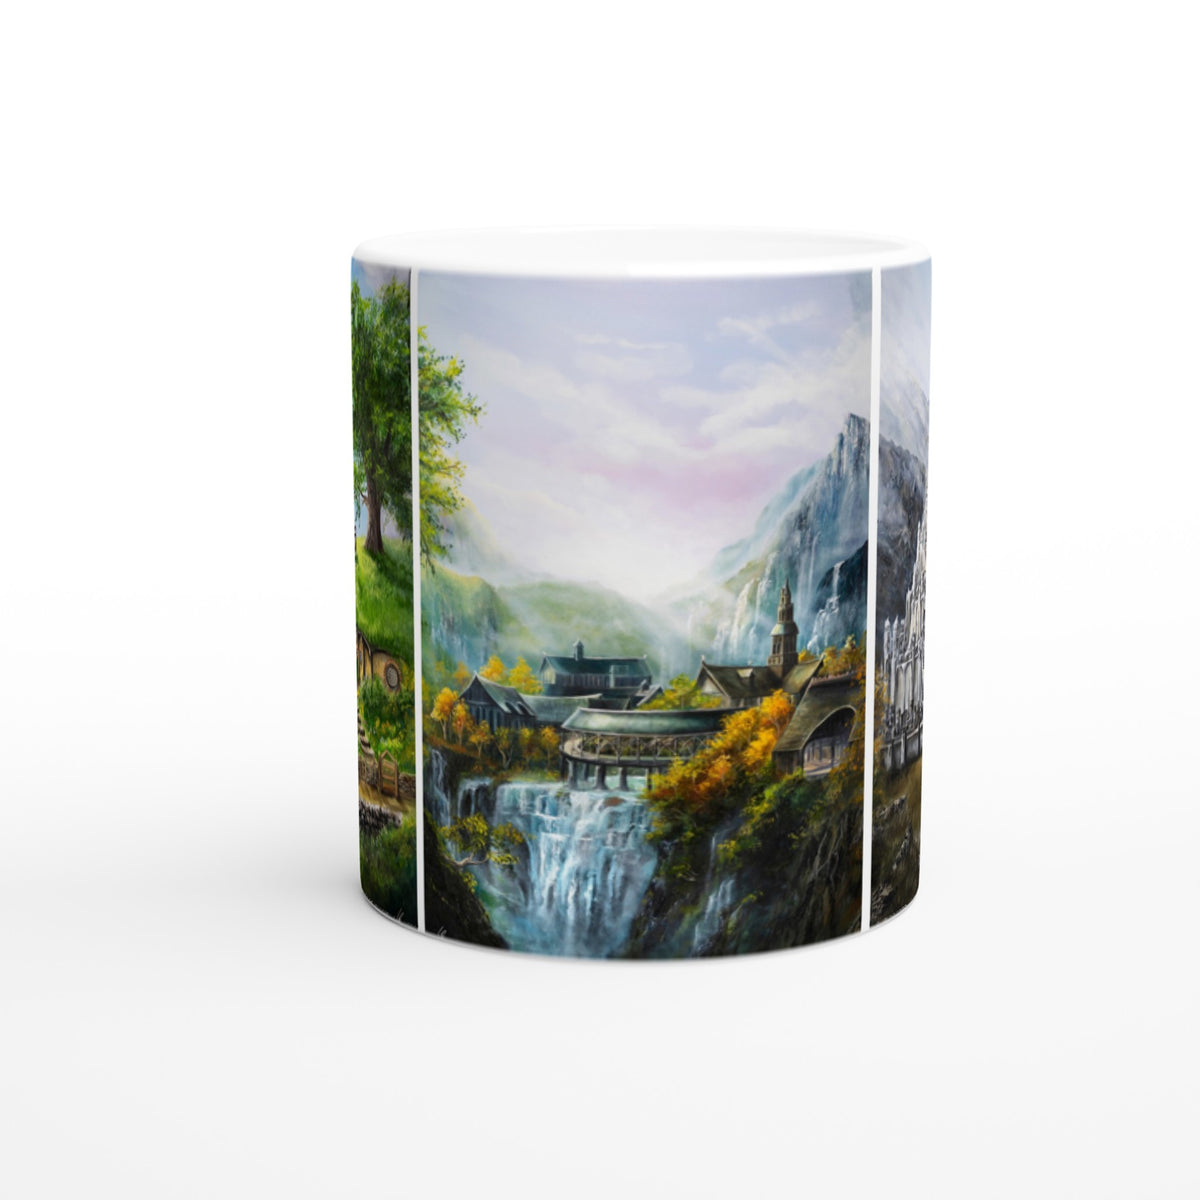 "Lord Of The Rings triptych" Mug